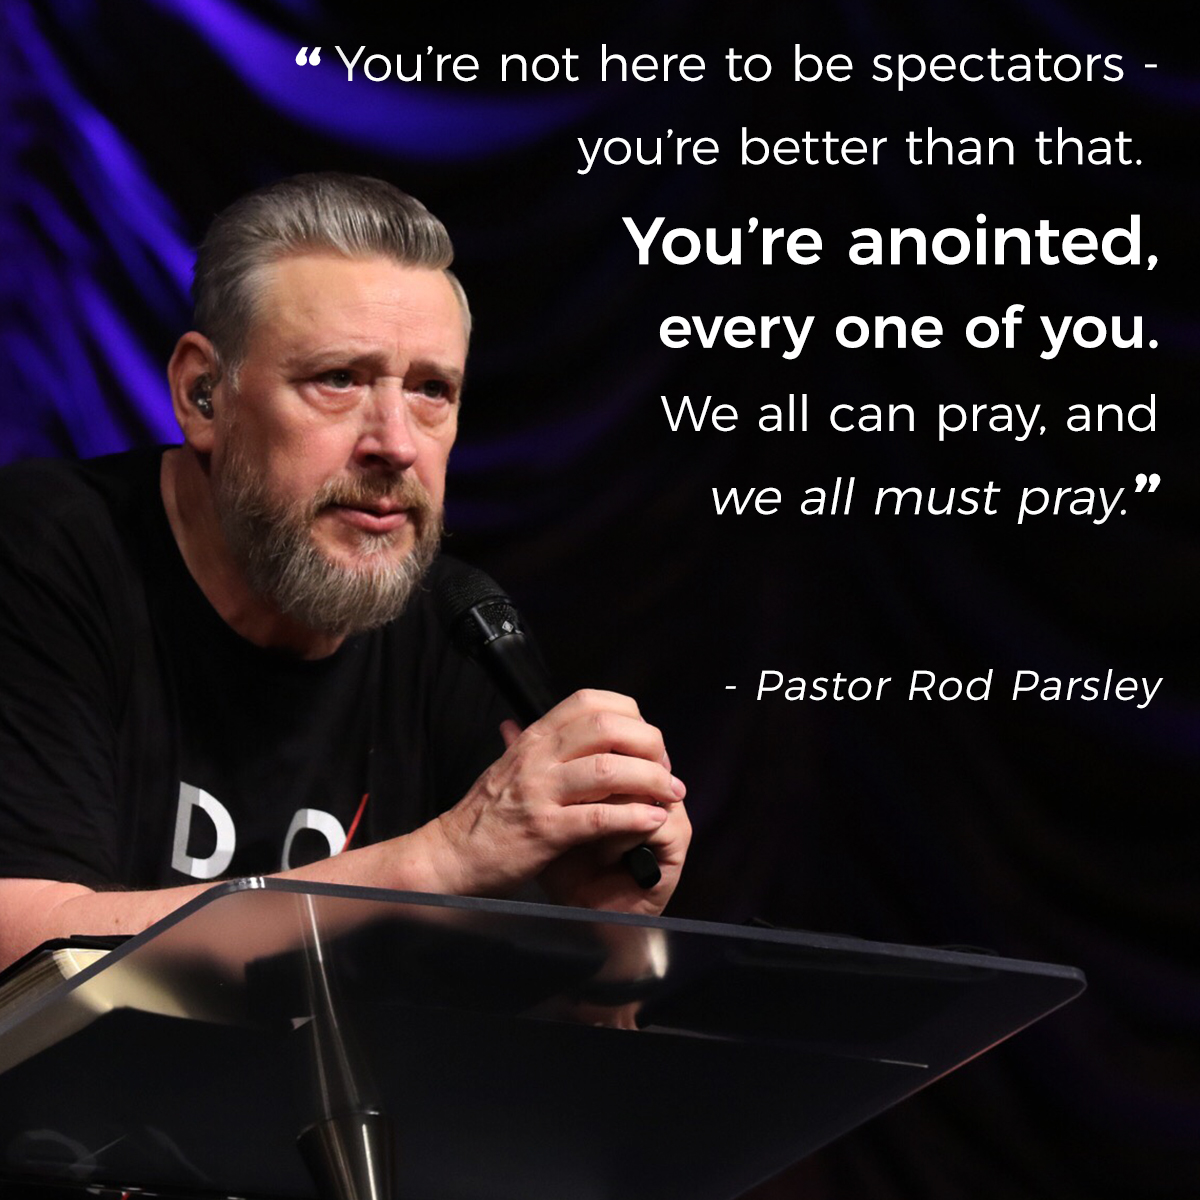 “You’re not here to be spectators – you’re better than that. You’re anointed, every one of you. We all can pray, and we all must pray.” – Pastor Rod Parsley